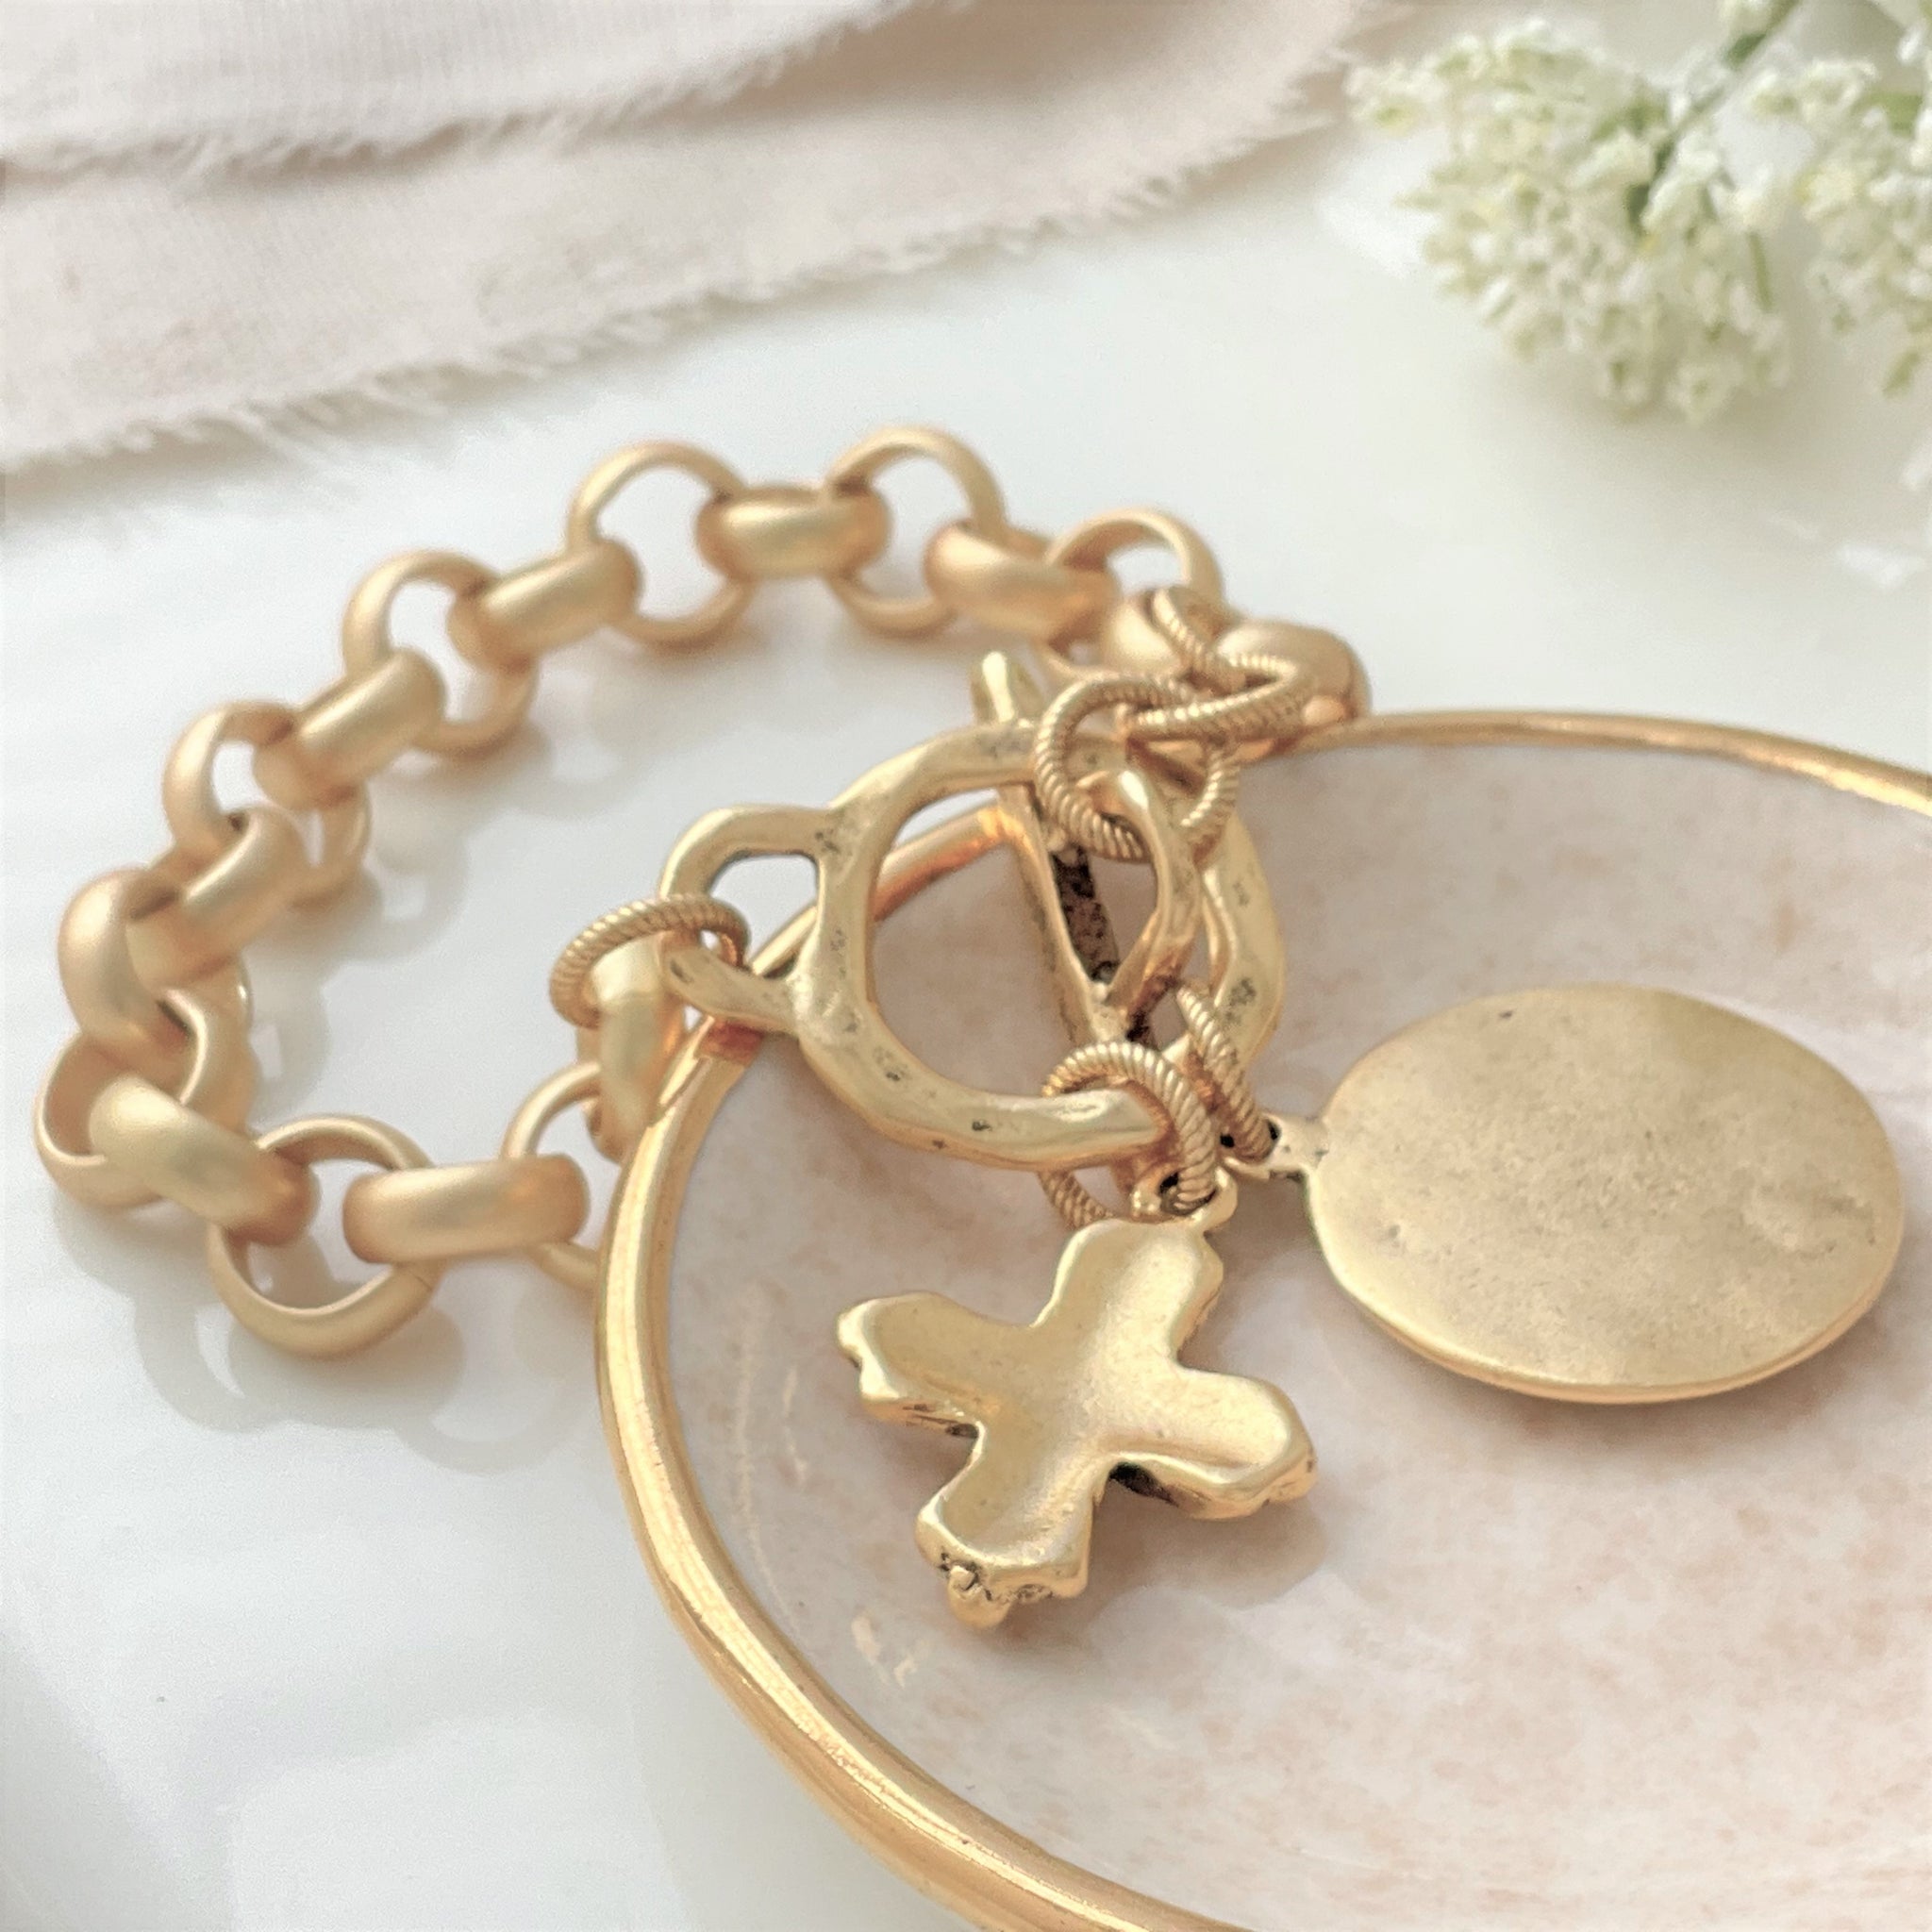 Cross Bracelet Gold/Pink Women- Designed to Fit Wrists Up to 7.5